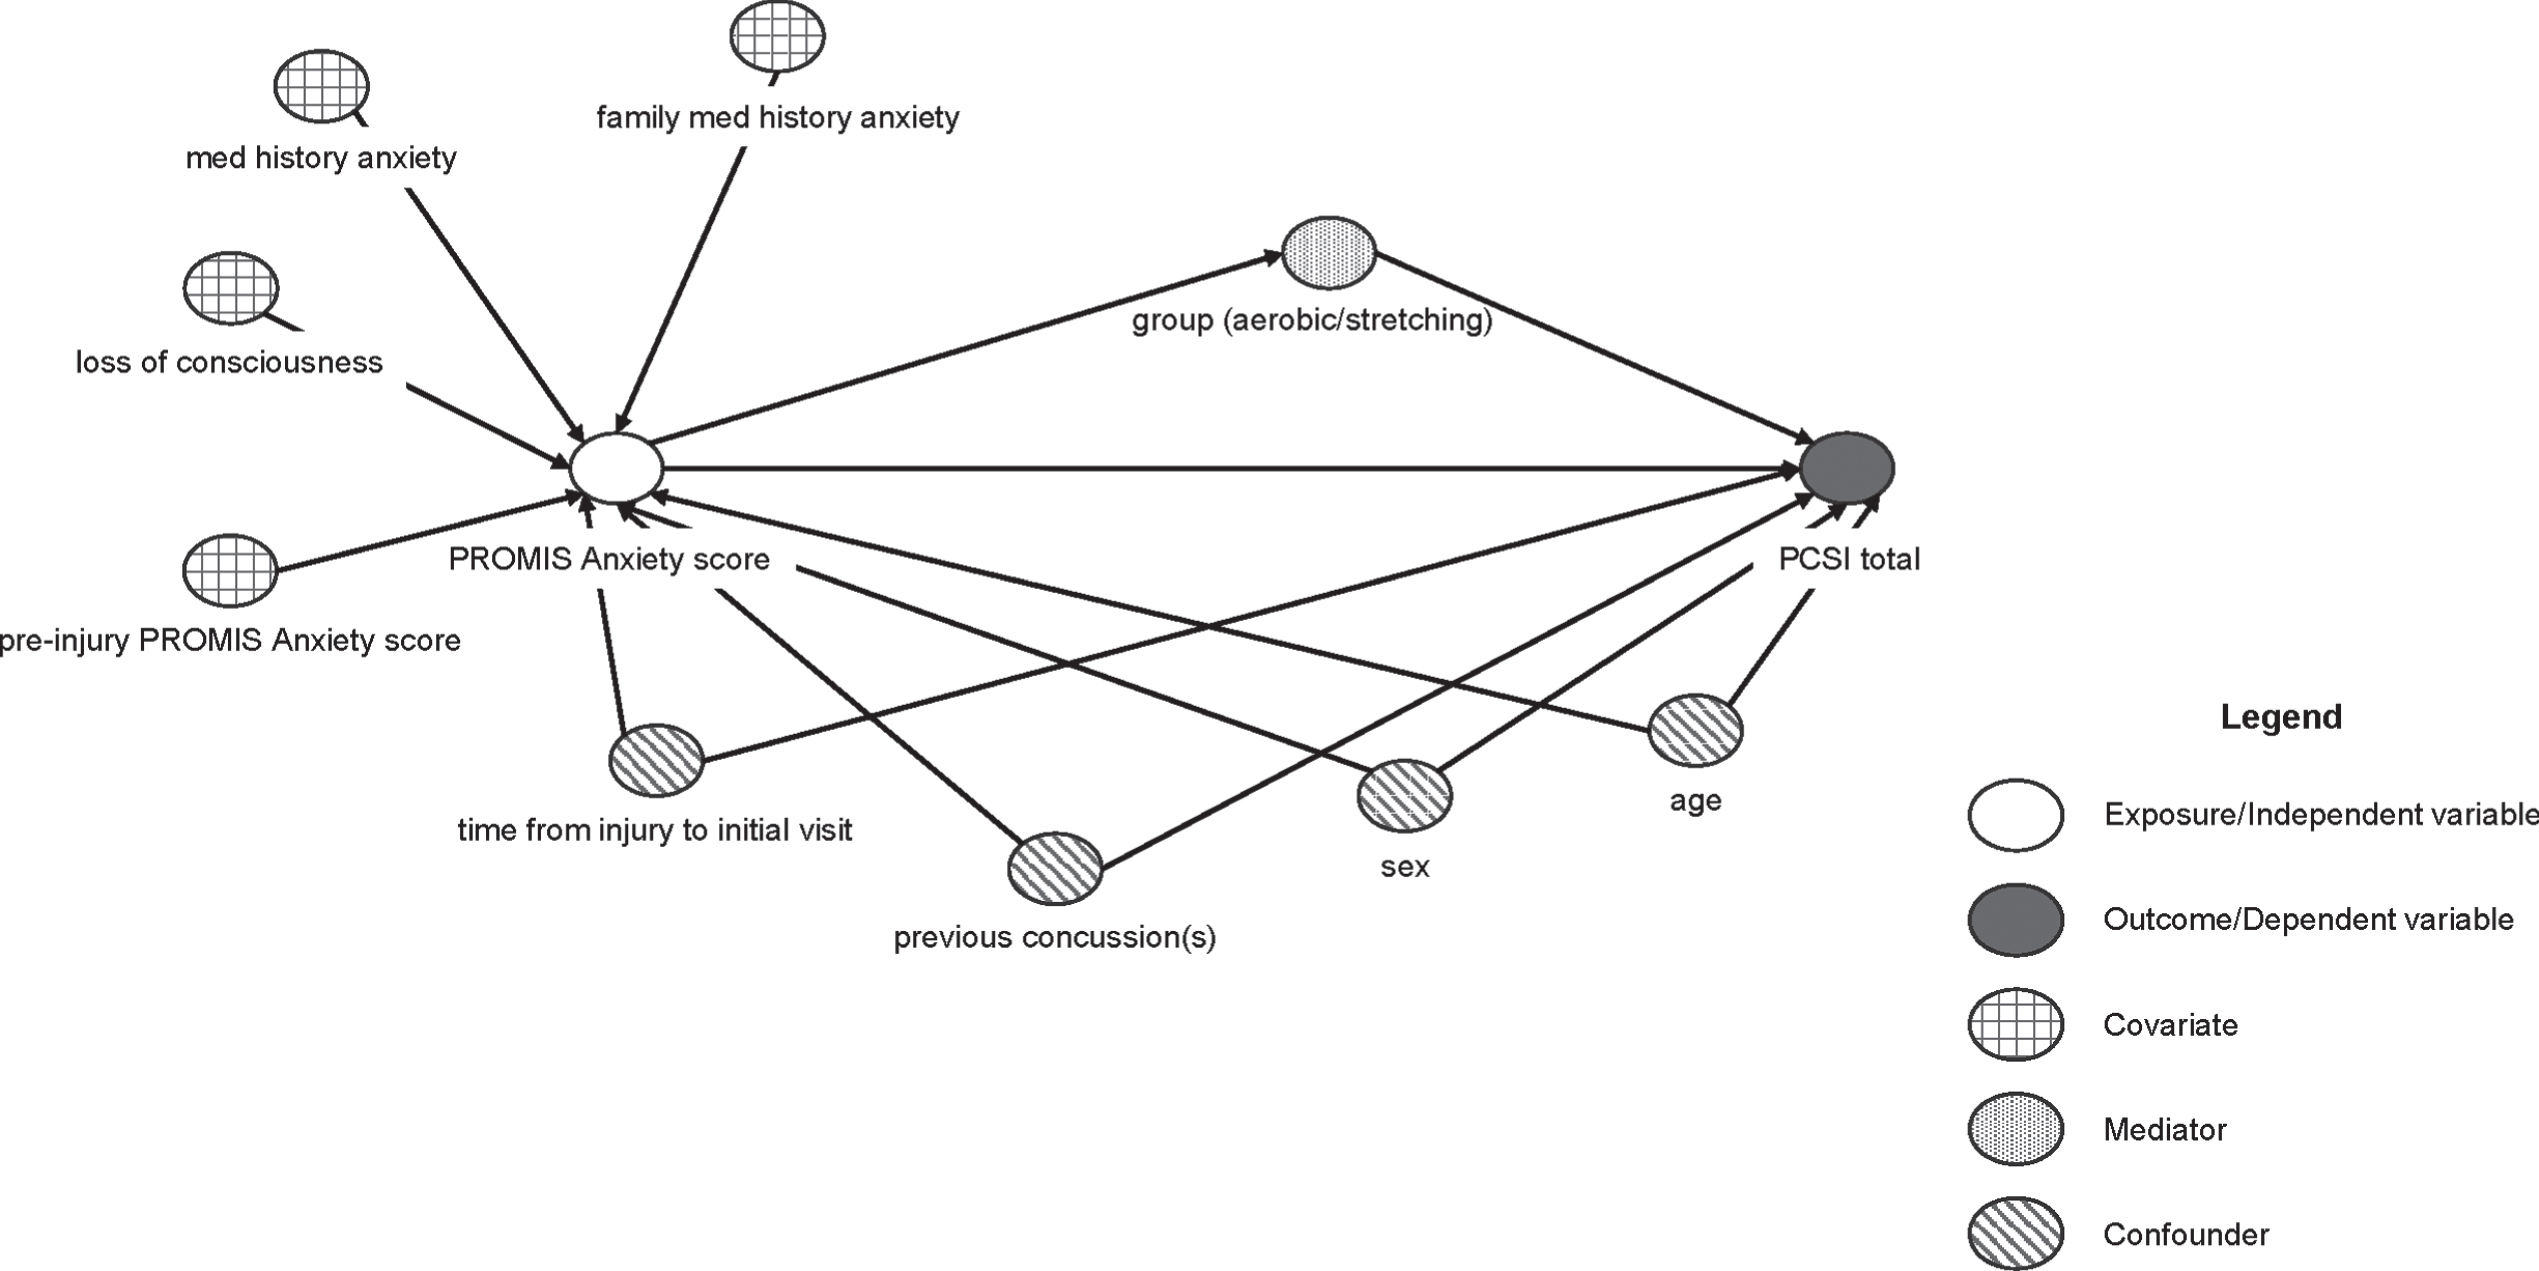 Directed Acyclic Graph (DAG) to demonstrate the relationships between PROMIS Anxiety pediatric short form score (exposure) and PCSI score (outcome), and potential covariates and confounders to be included in the model.